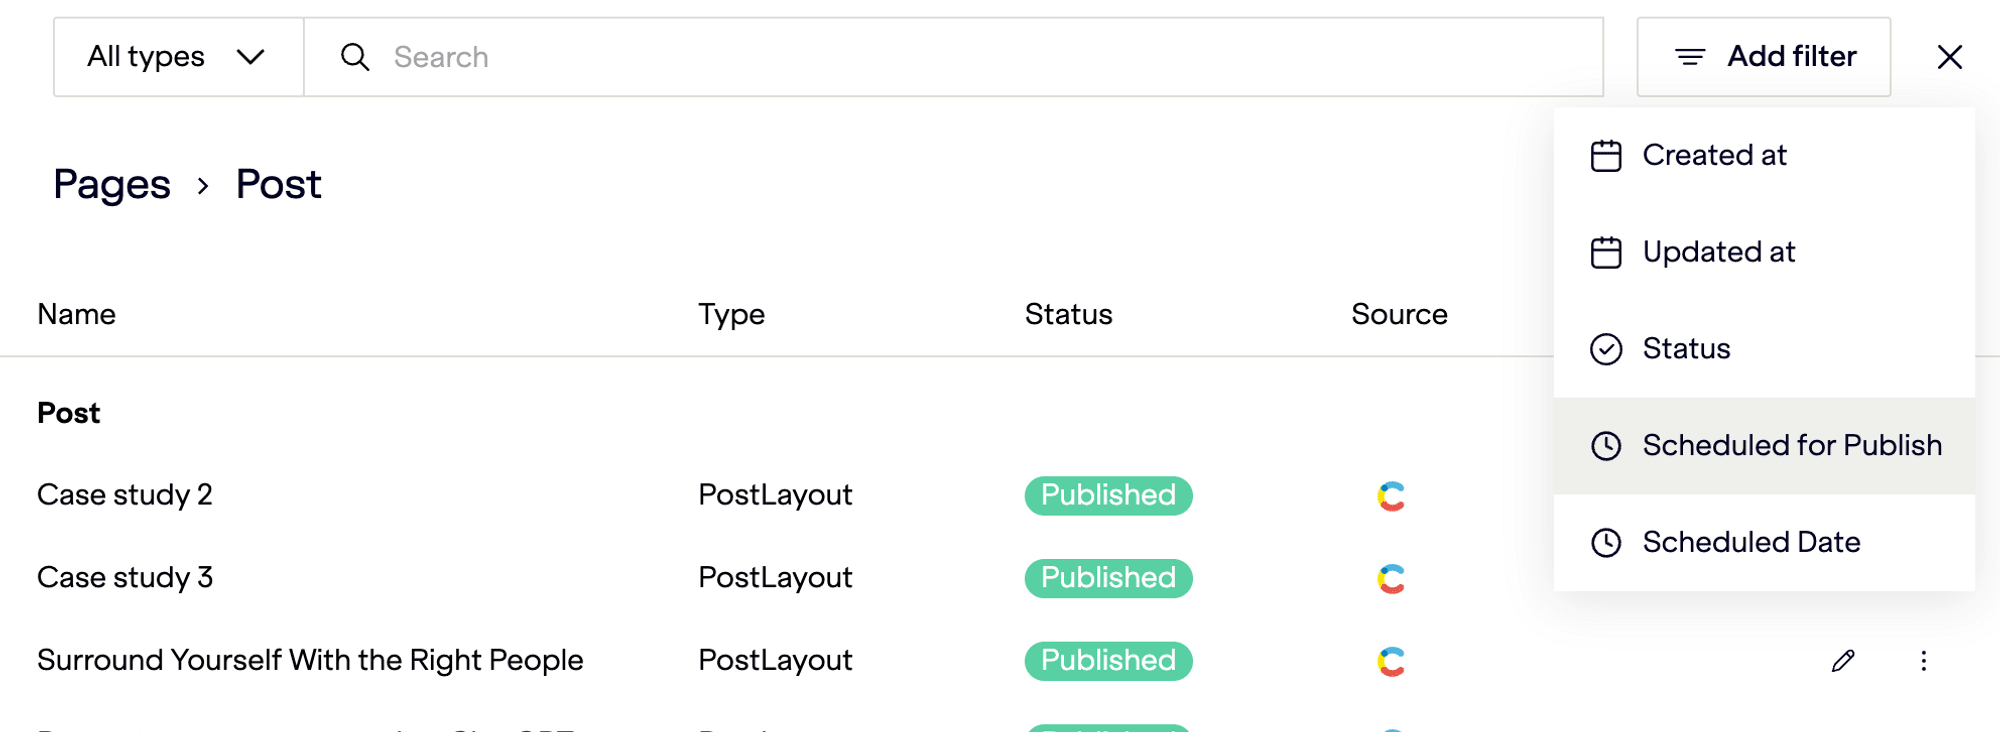 Scheduled publishing available filters.